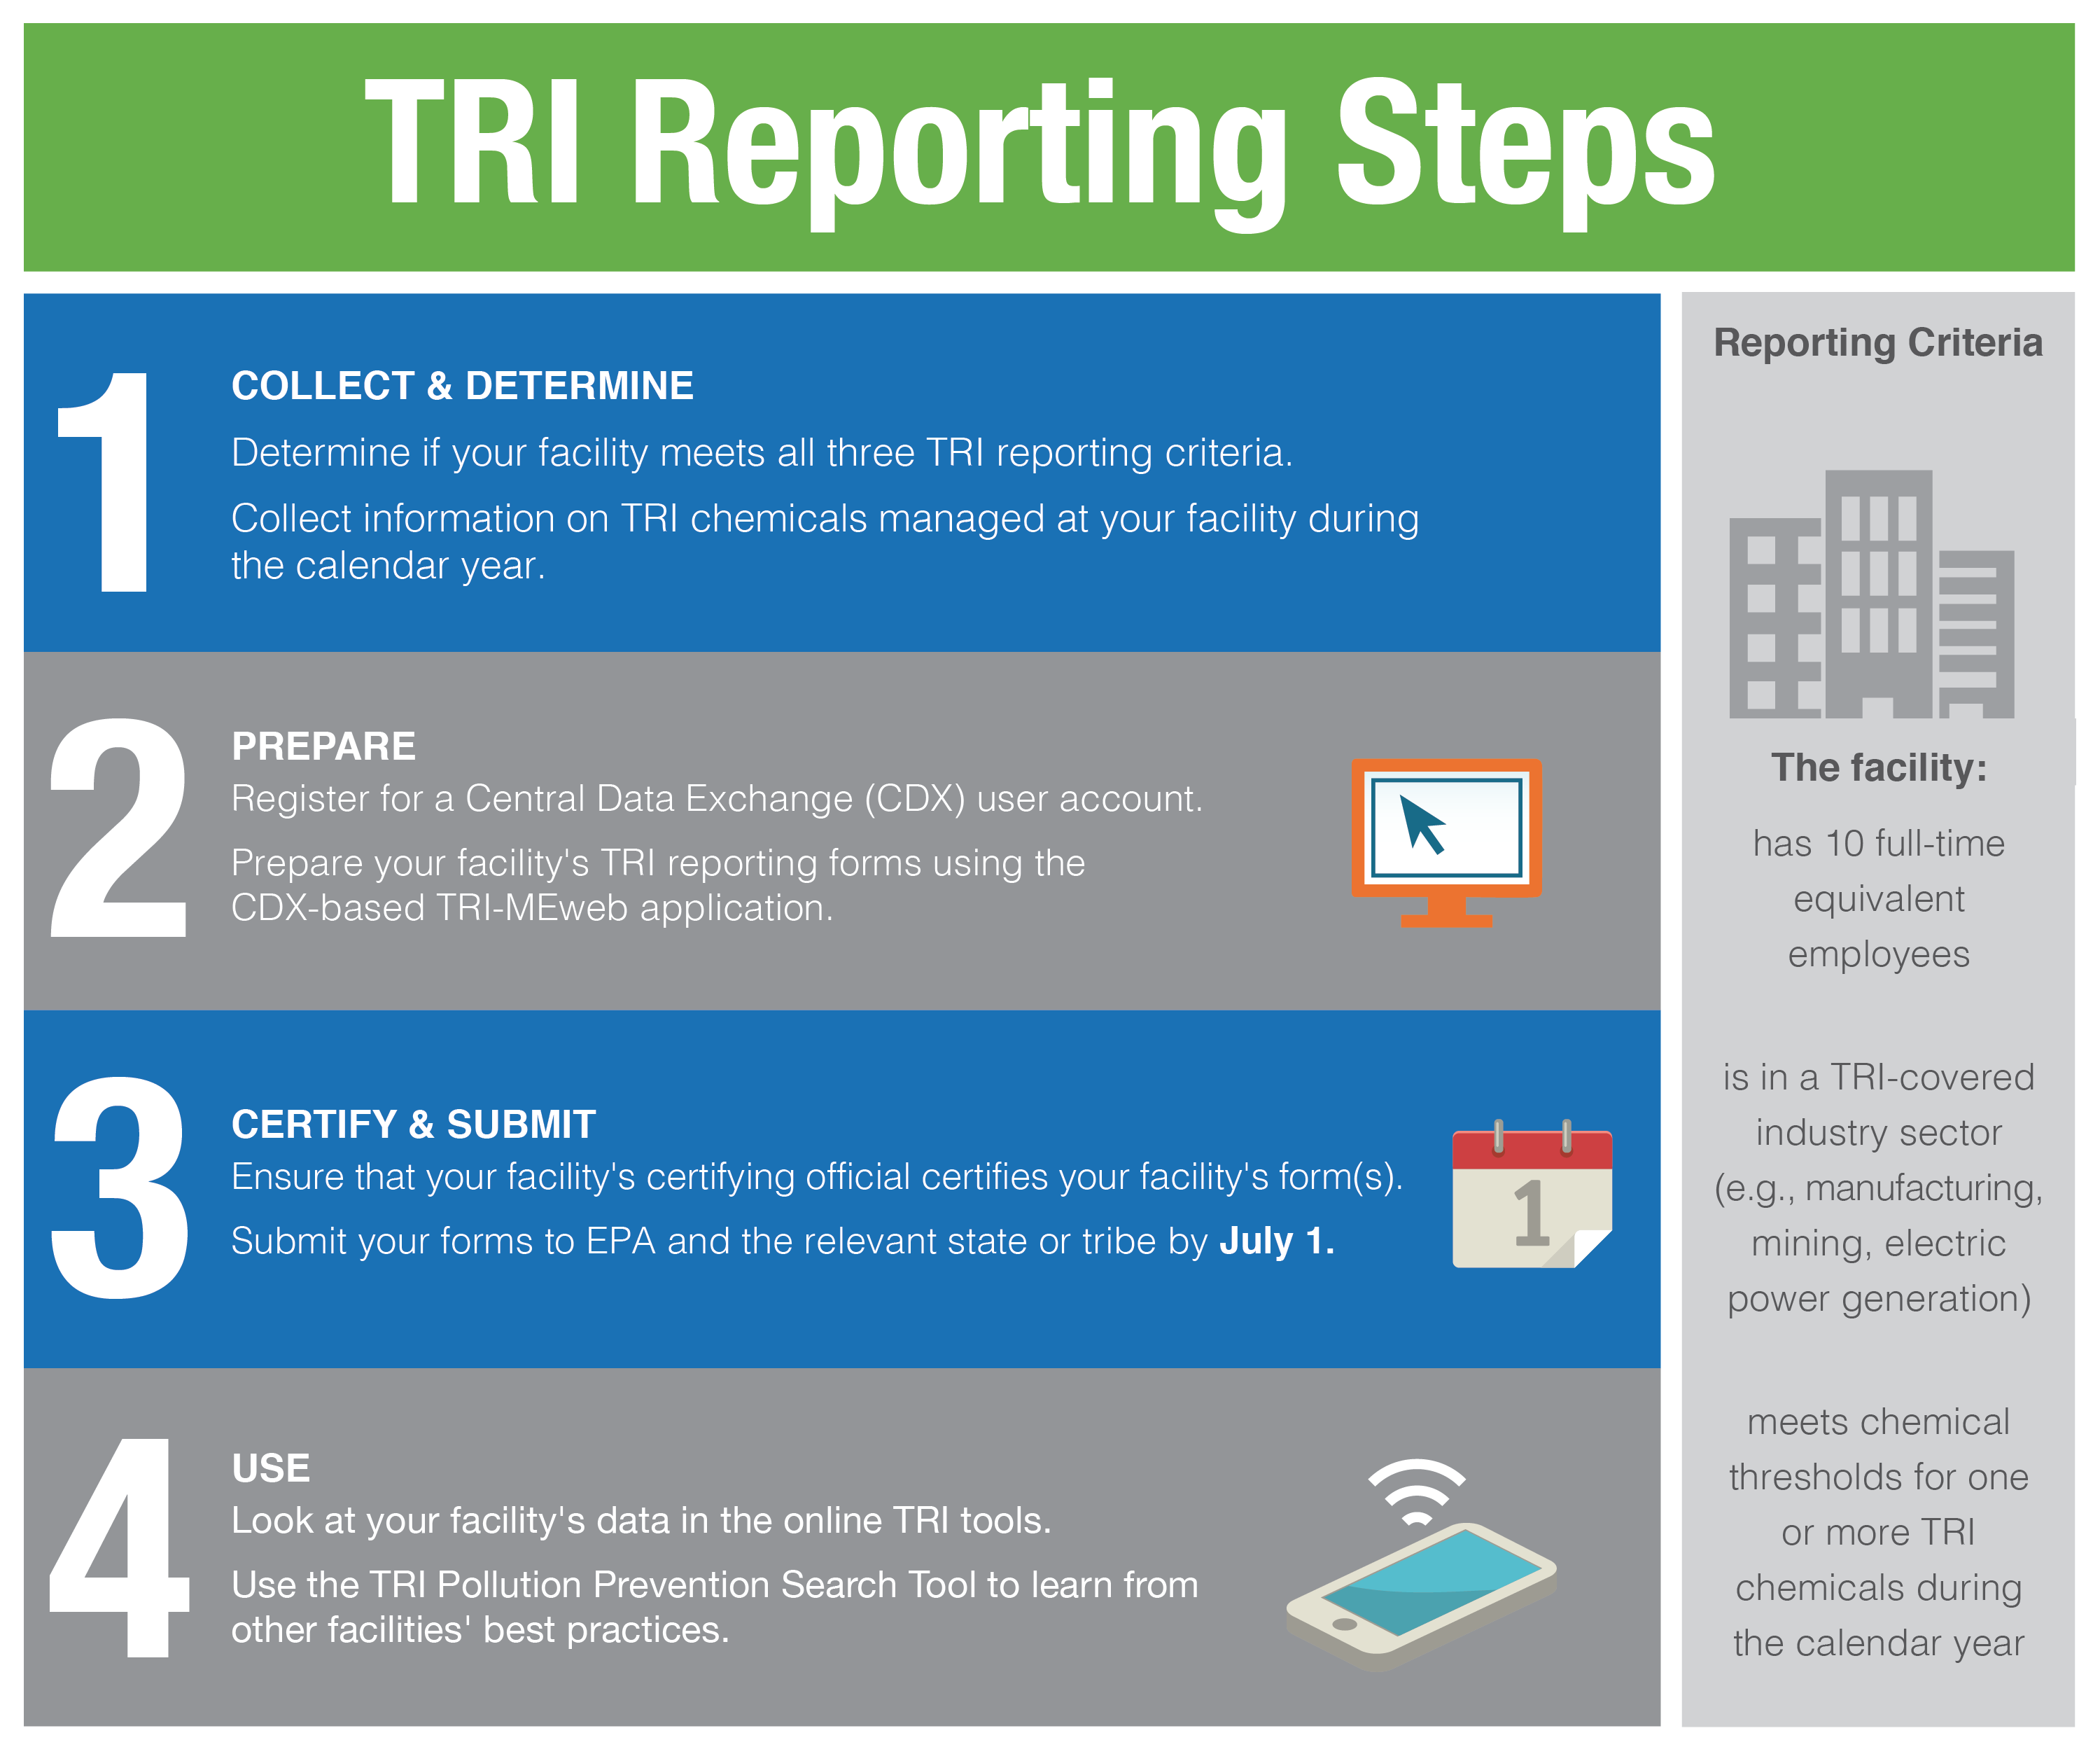 a poster explaining the 4 TRI reporting steps.